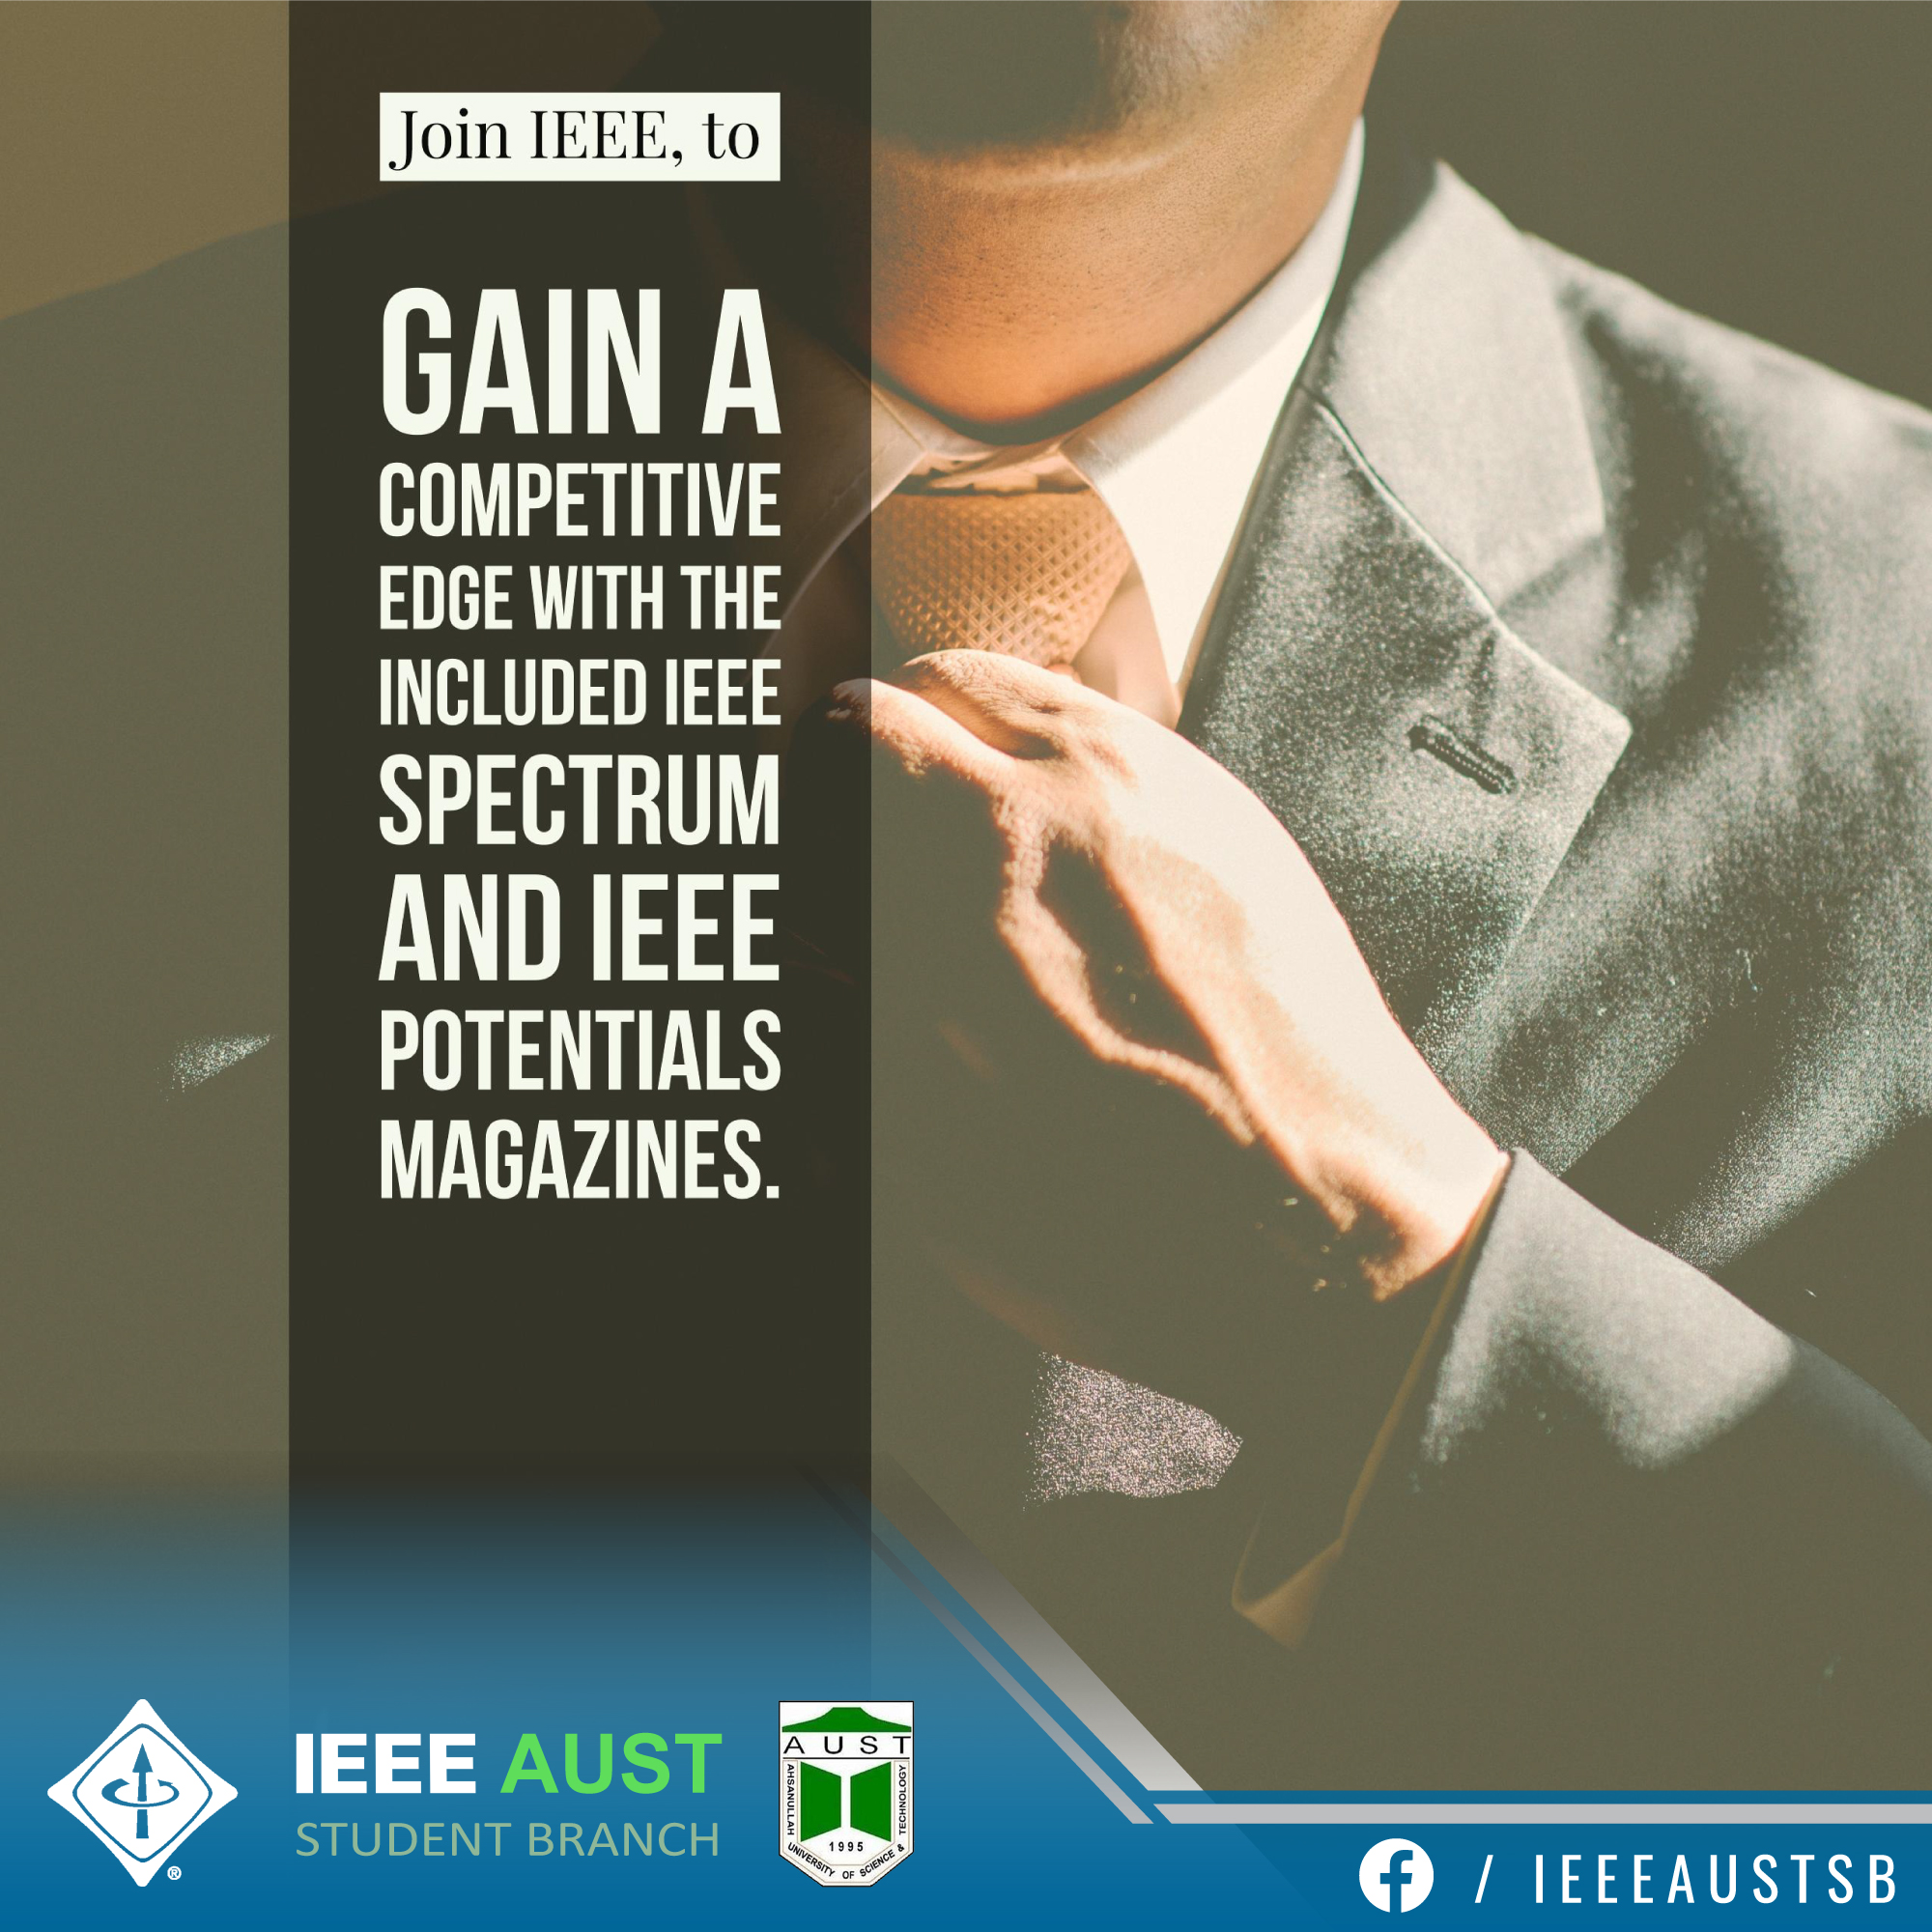 Join IEEE tain a competitive edge with the included IEEE Spectrum and IEEE Potentials magazines.